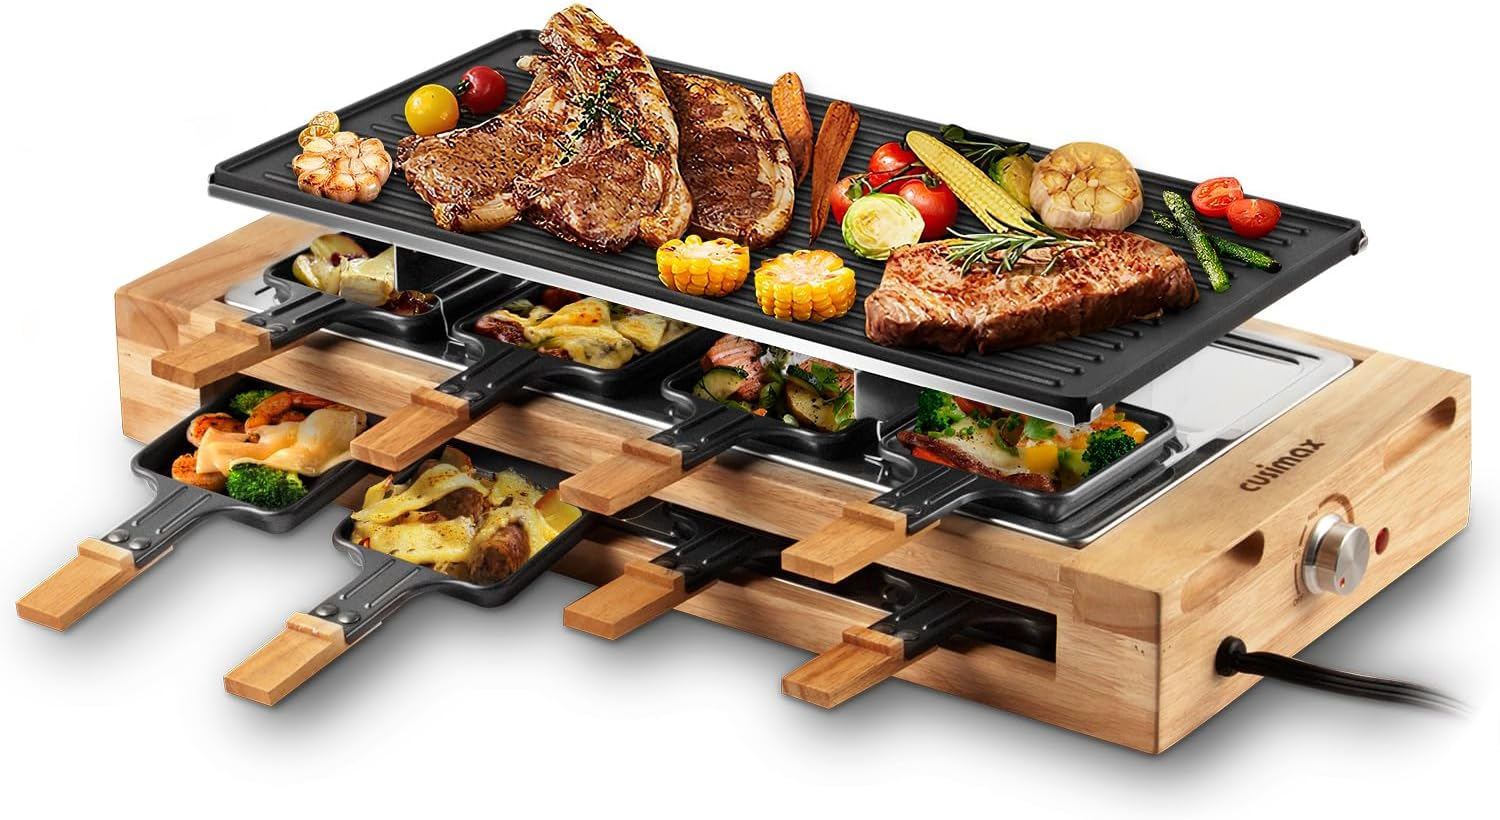 Indoor Grill, CUSIMAX Raclette Table Grill, 1500W Electric Grill Korean BBQ Grill with 2 in 1 Reversible Non-stick Plate/Wooden Base, Party Grill with 8 Trays & Wooden Spatulas, New Model - Barbecue Whizz...Watch My Smoke!